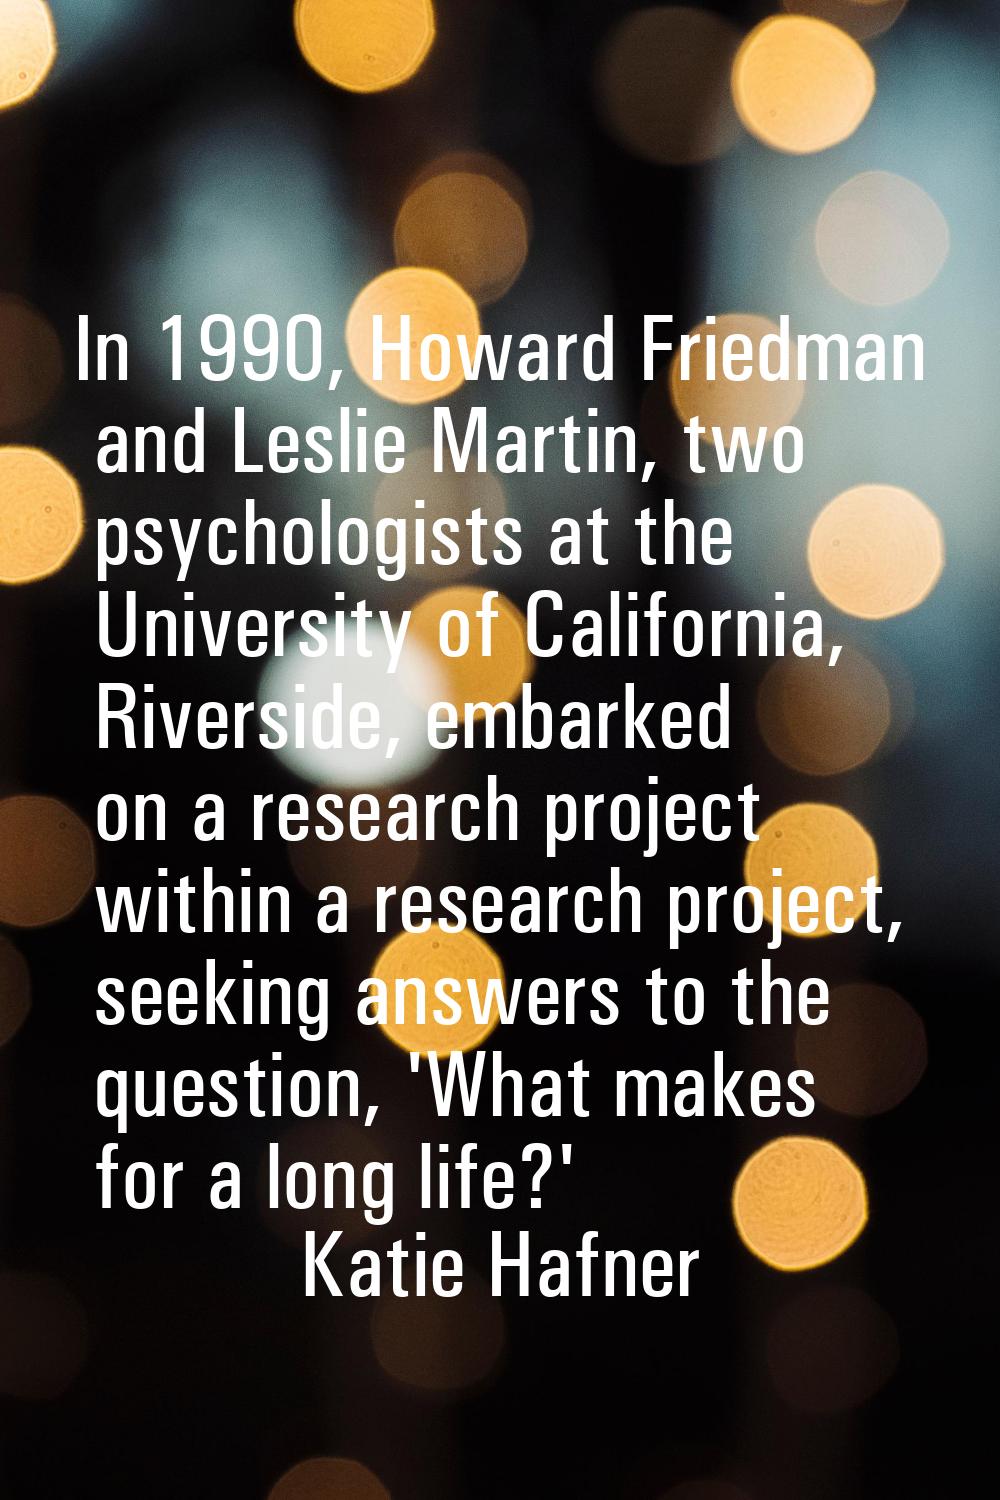 In 1990, Howard Friedman and Leslie Martin, two psychologists at the University of California, Rive